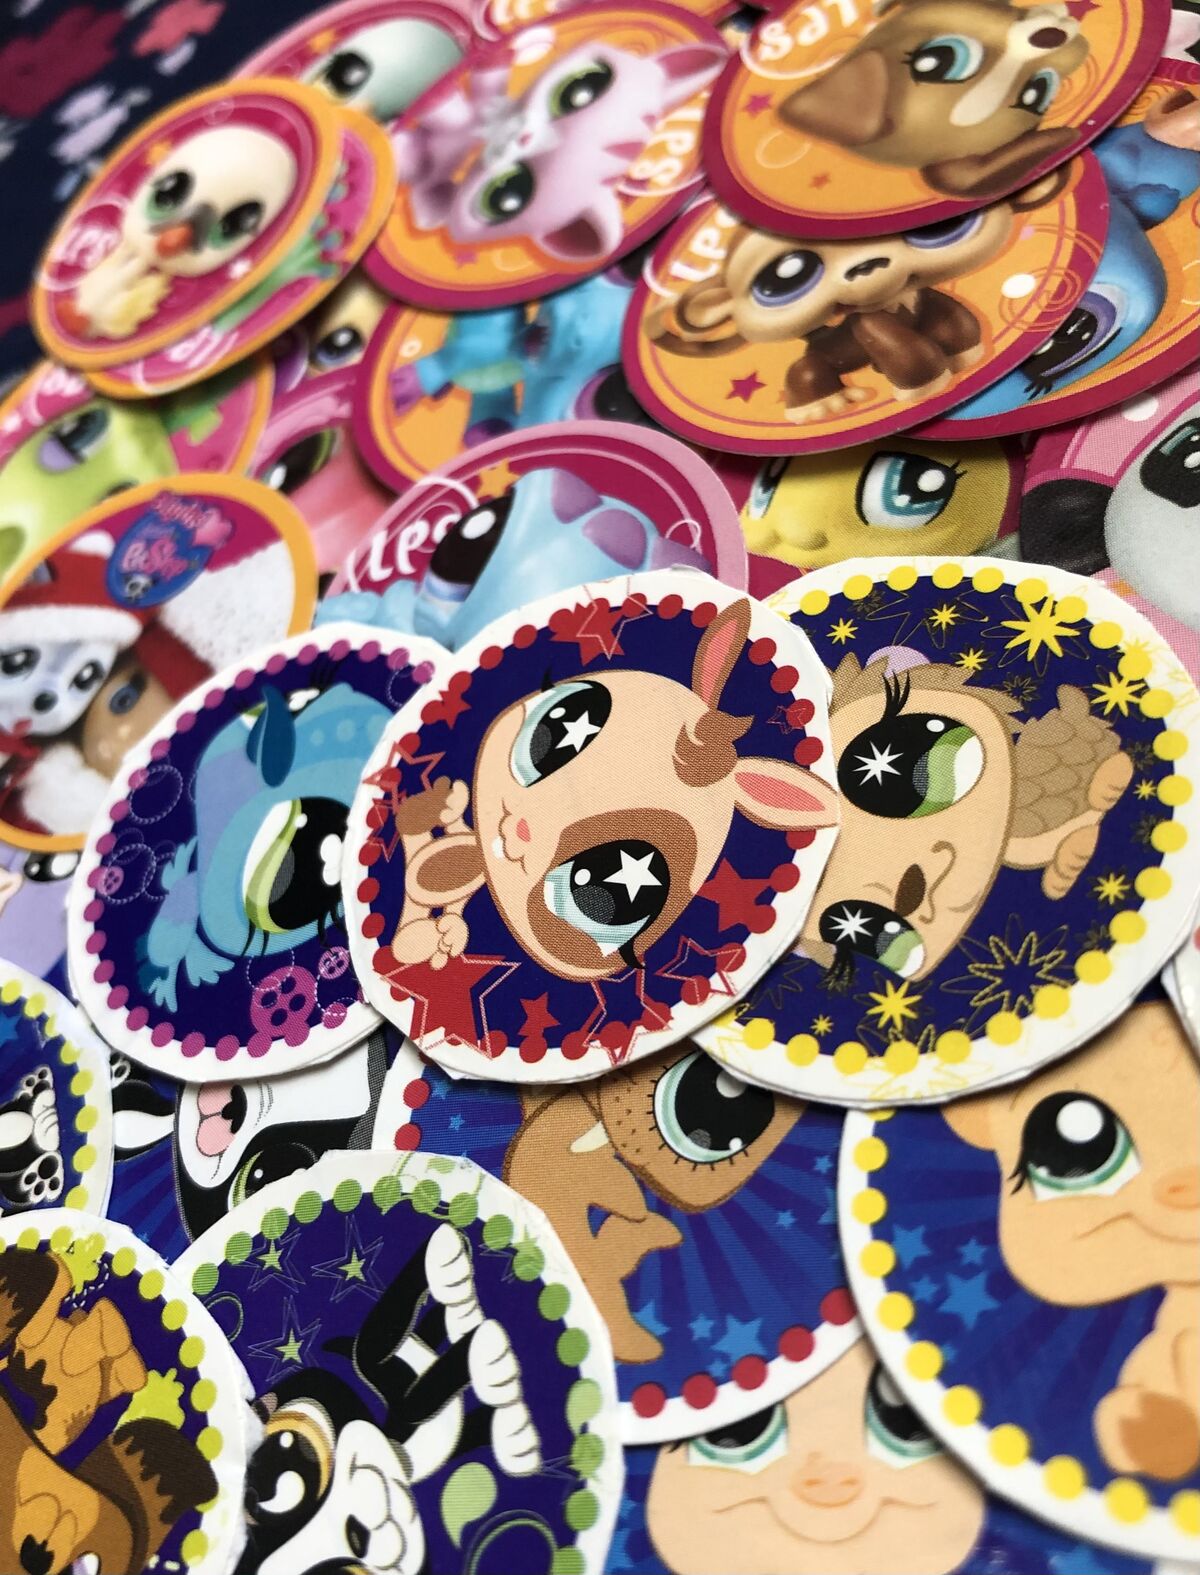 https://static.wikia.nocookie.net/the-littlest-pet-shop-wikia/images/d/d6/Stickersphoto.jpg/revision/latest/scale-to-width-down/1200?cb=20220828184652